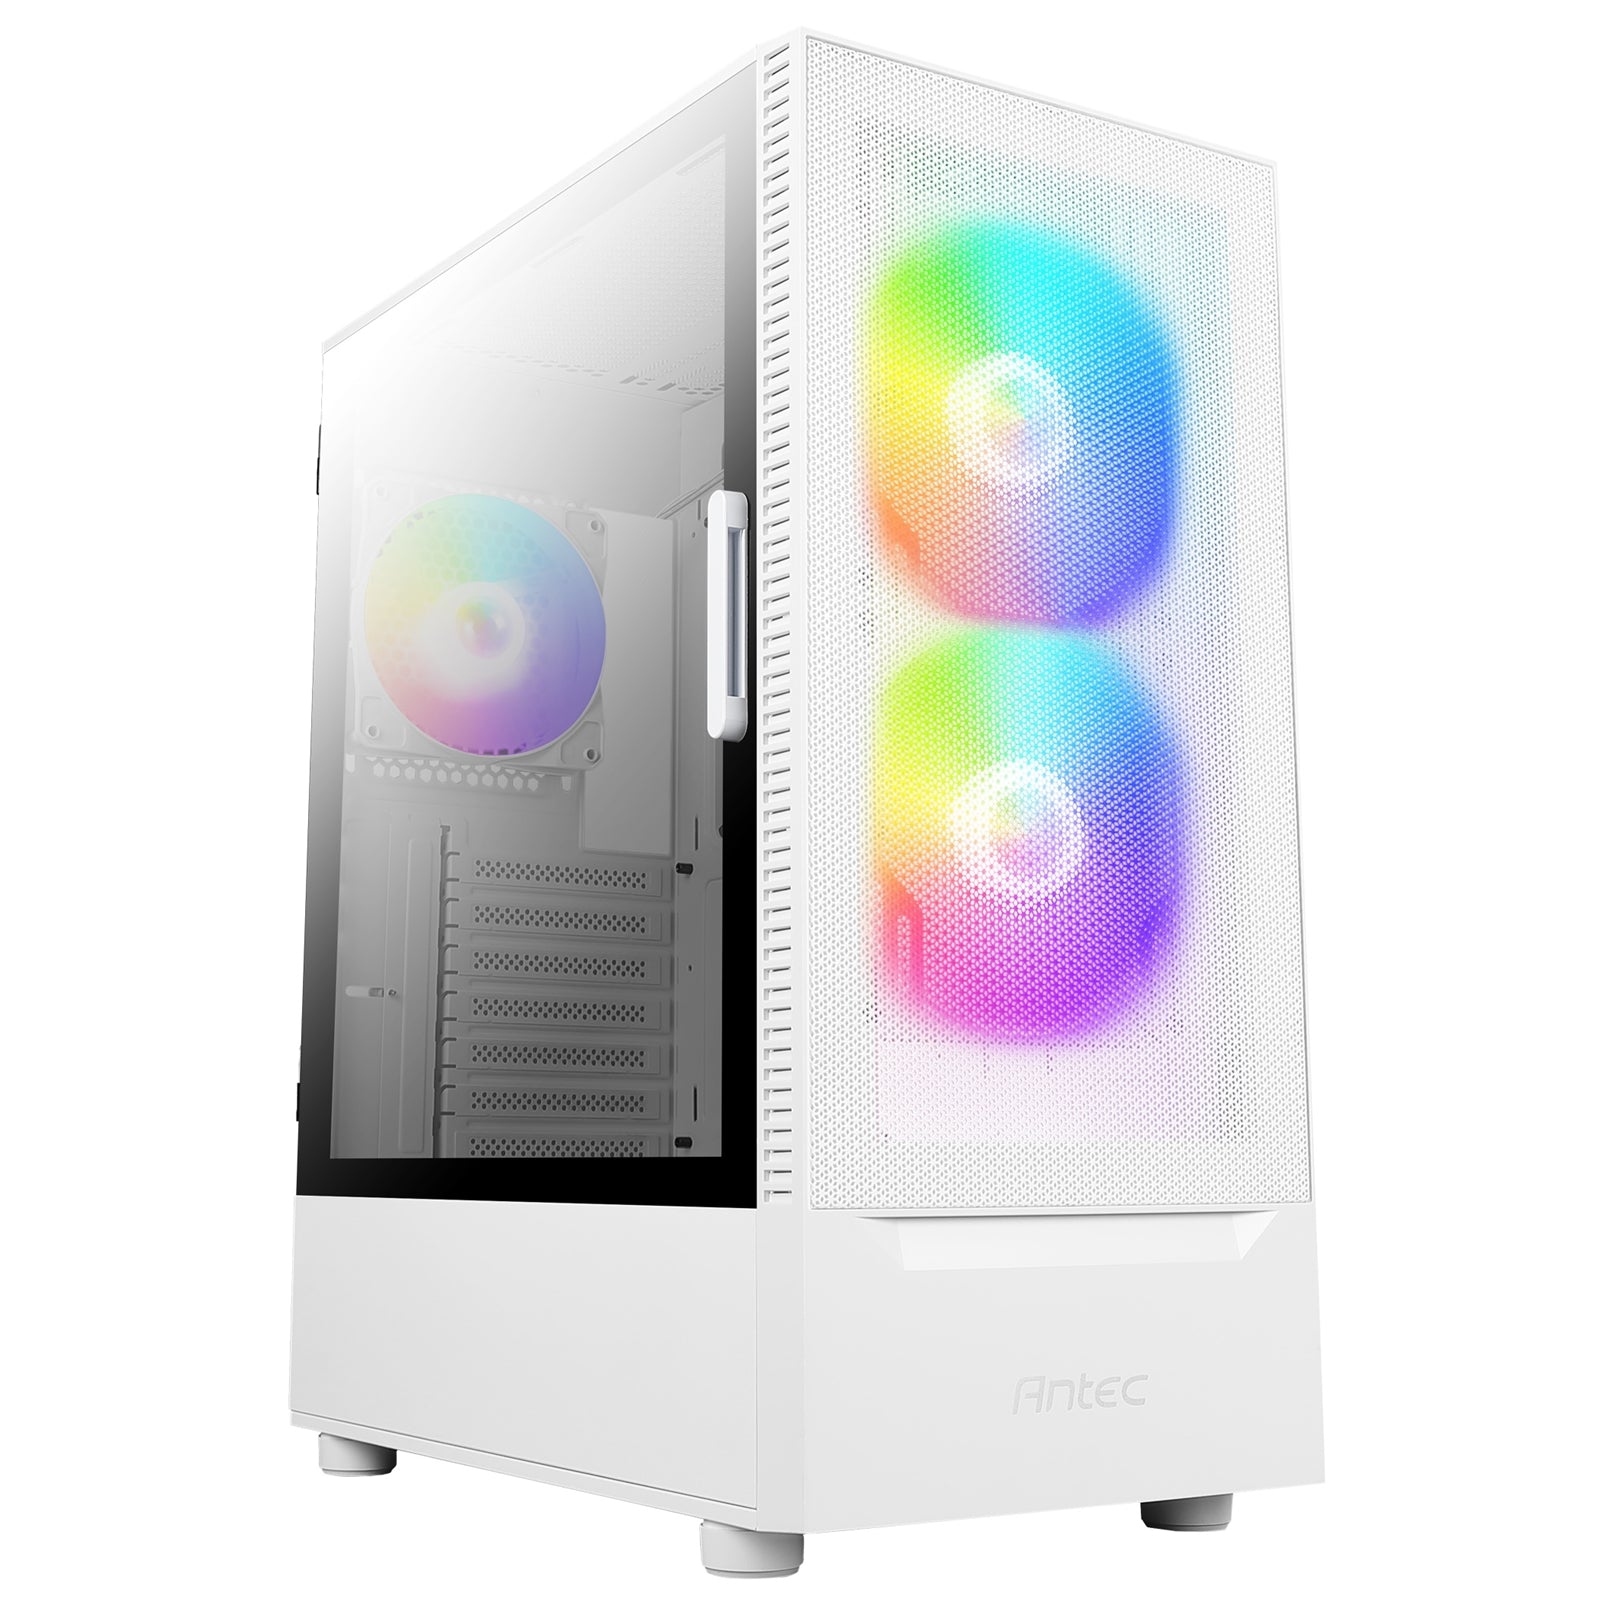 ANTEC NX410 Case, Gaming, White, Mid Tower, 1 x USB 3.0 / 2 x USB 2.0, Tempered Glass Side Window Panel